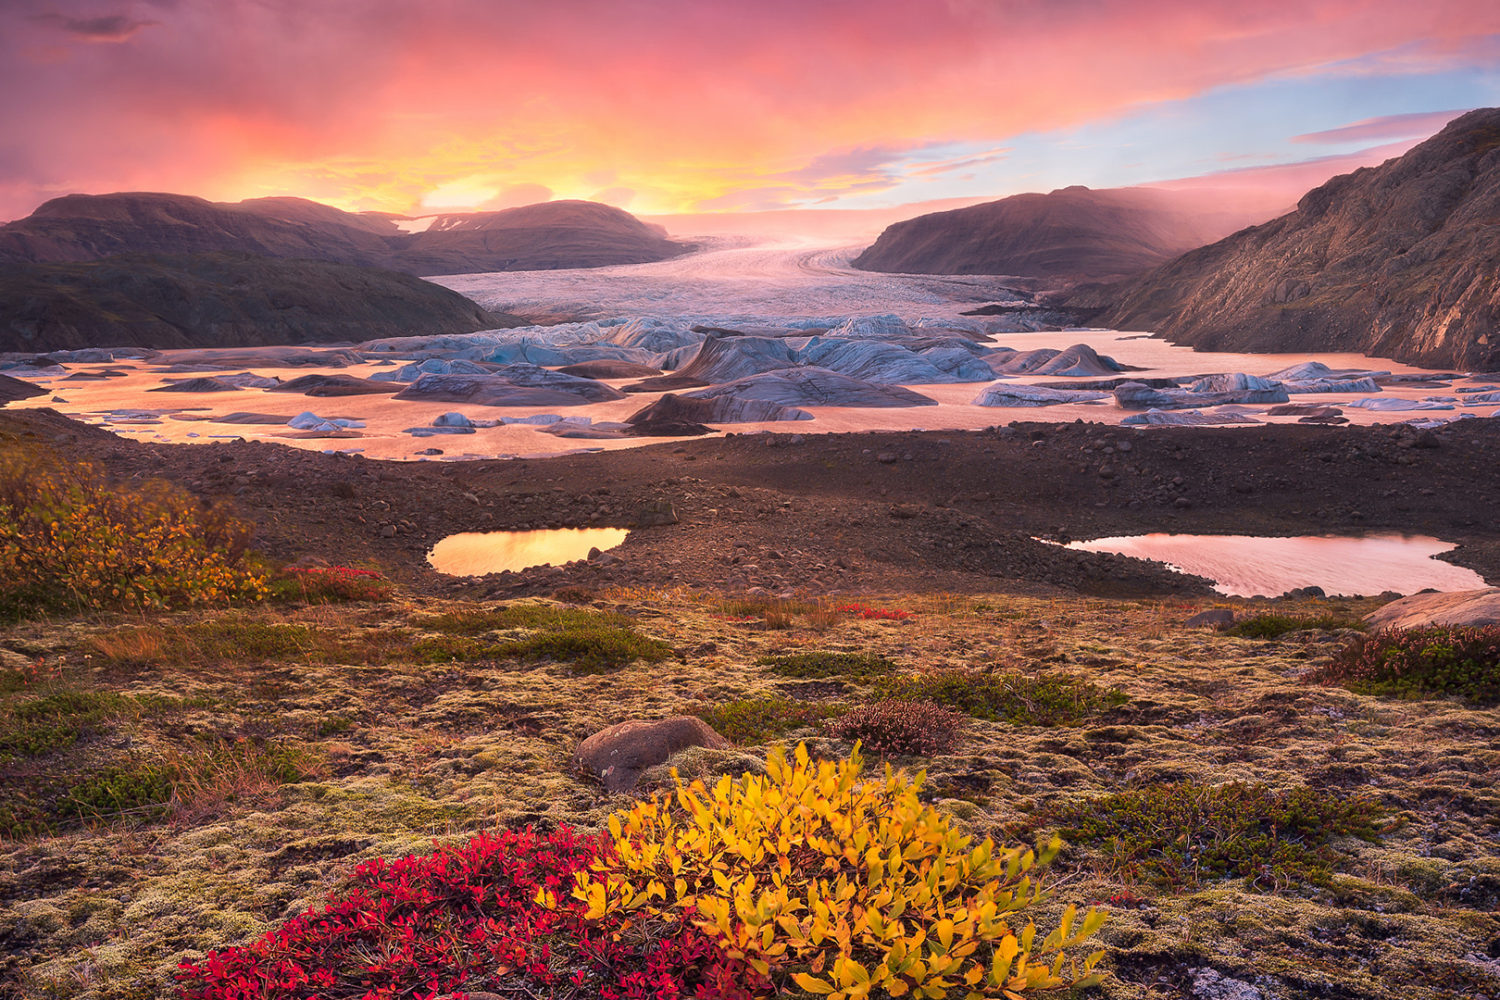 5 expert tips for stunning detail in landscape photos